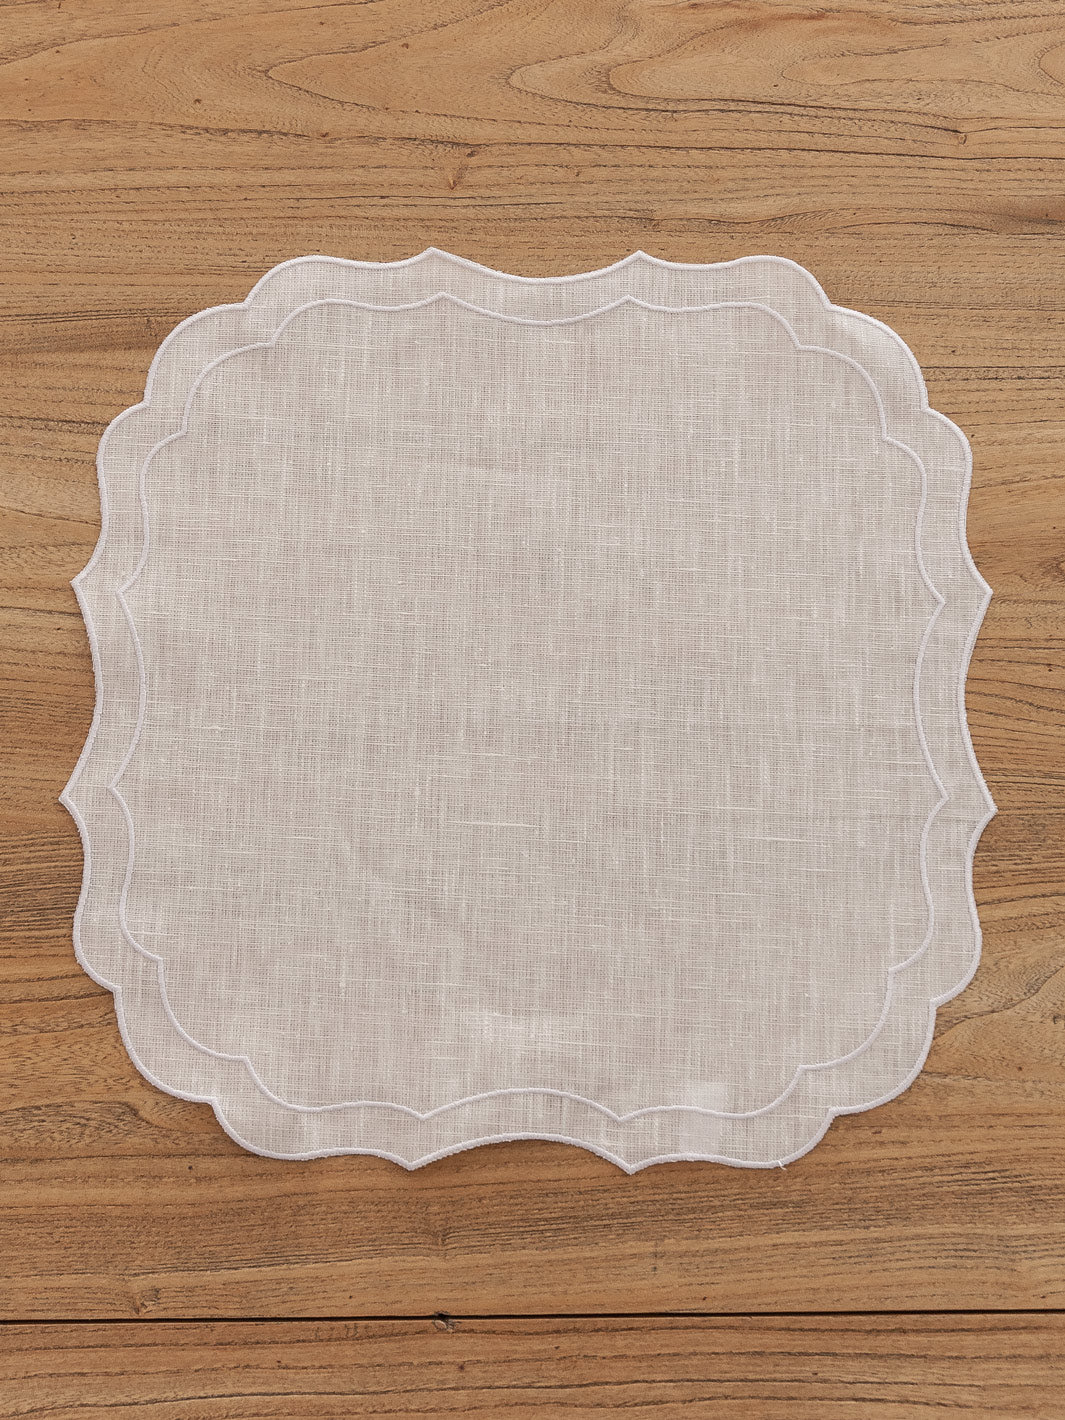 Yvory waxed linen Square placemat